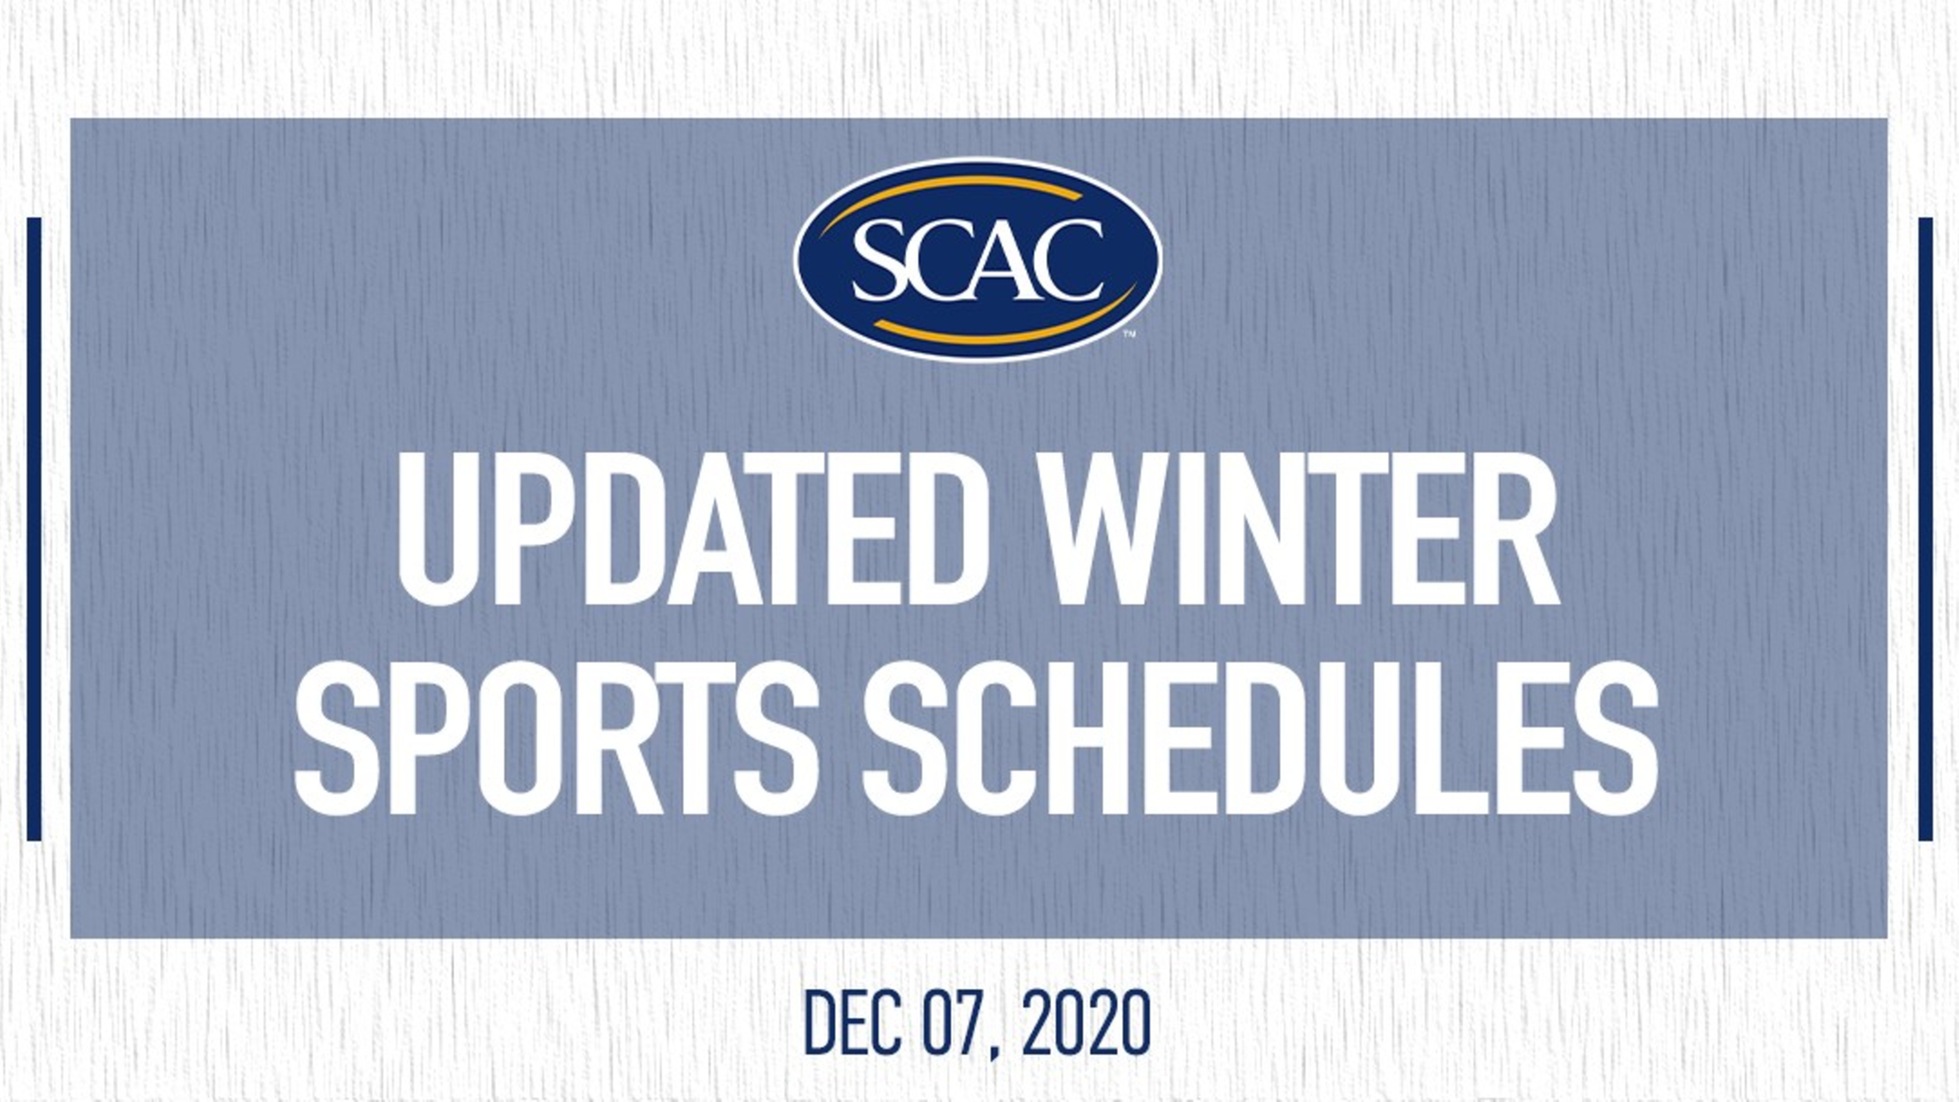 SCAC Announces Updated Schedules for Fall and Winter Sports